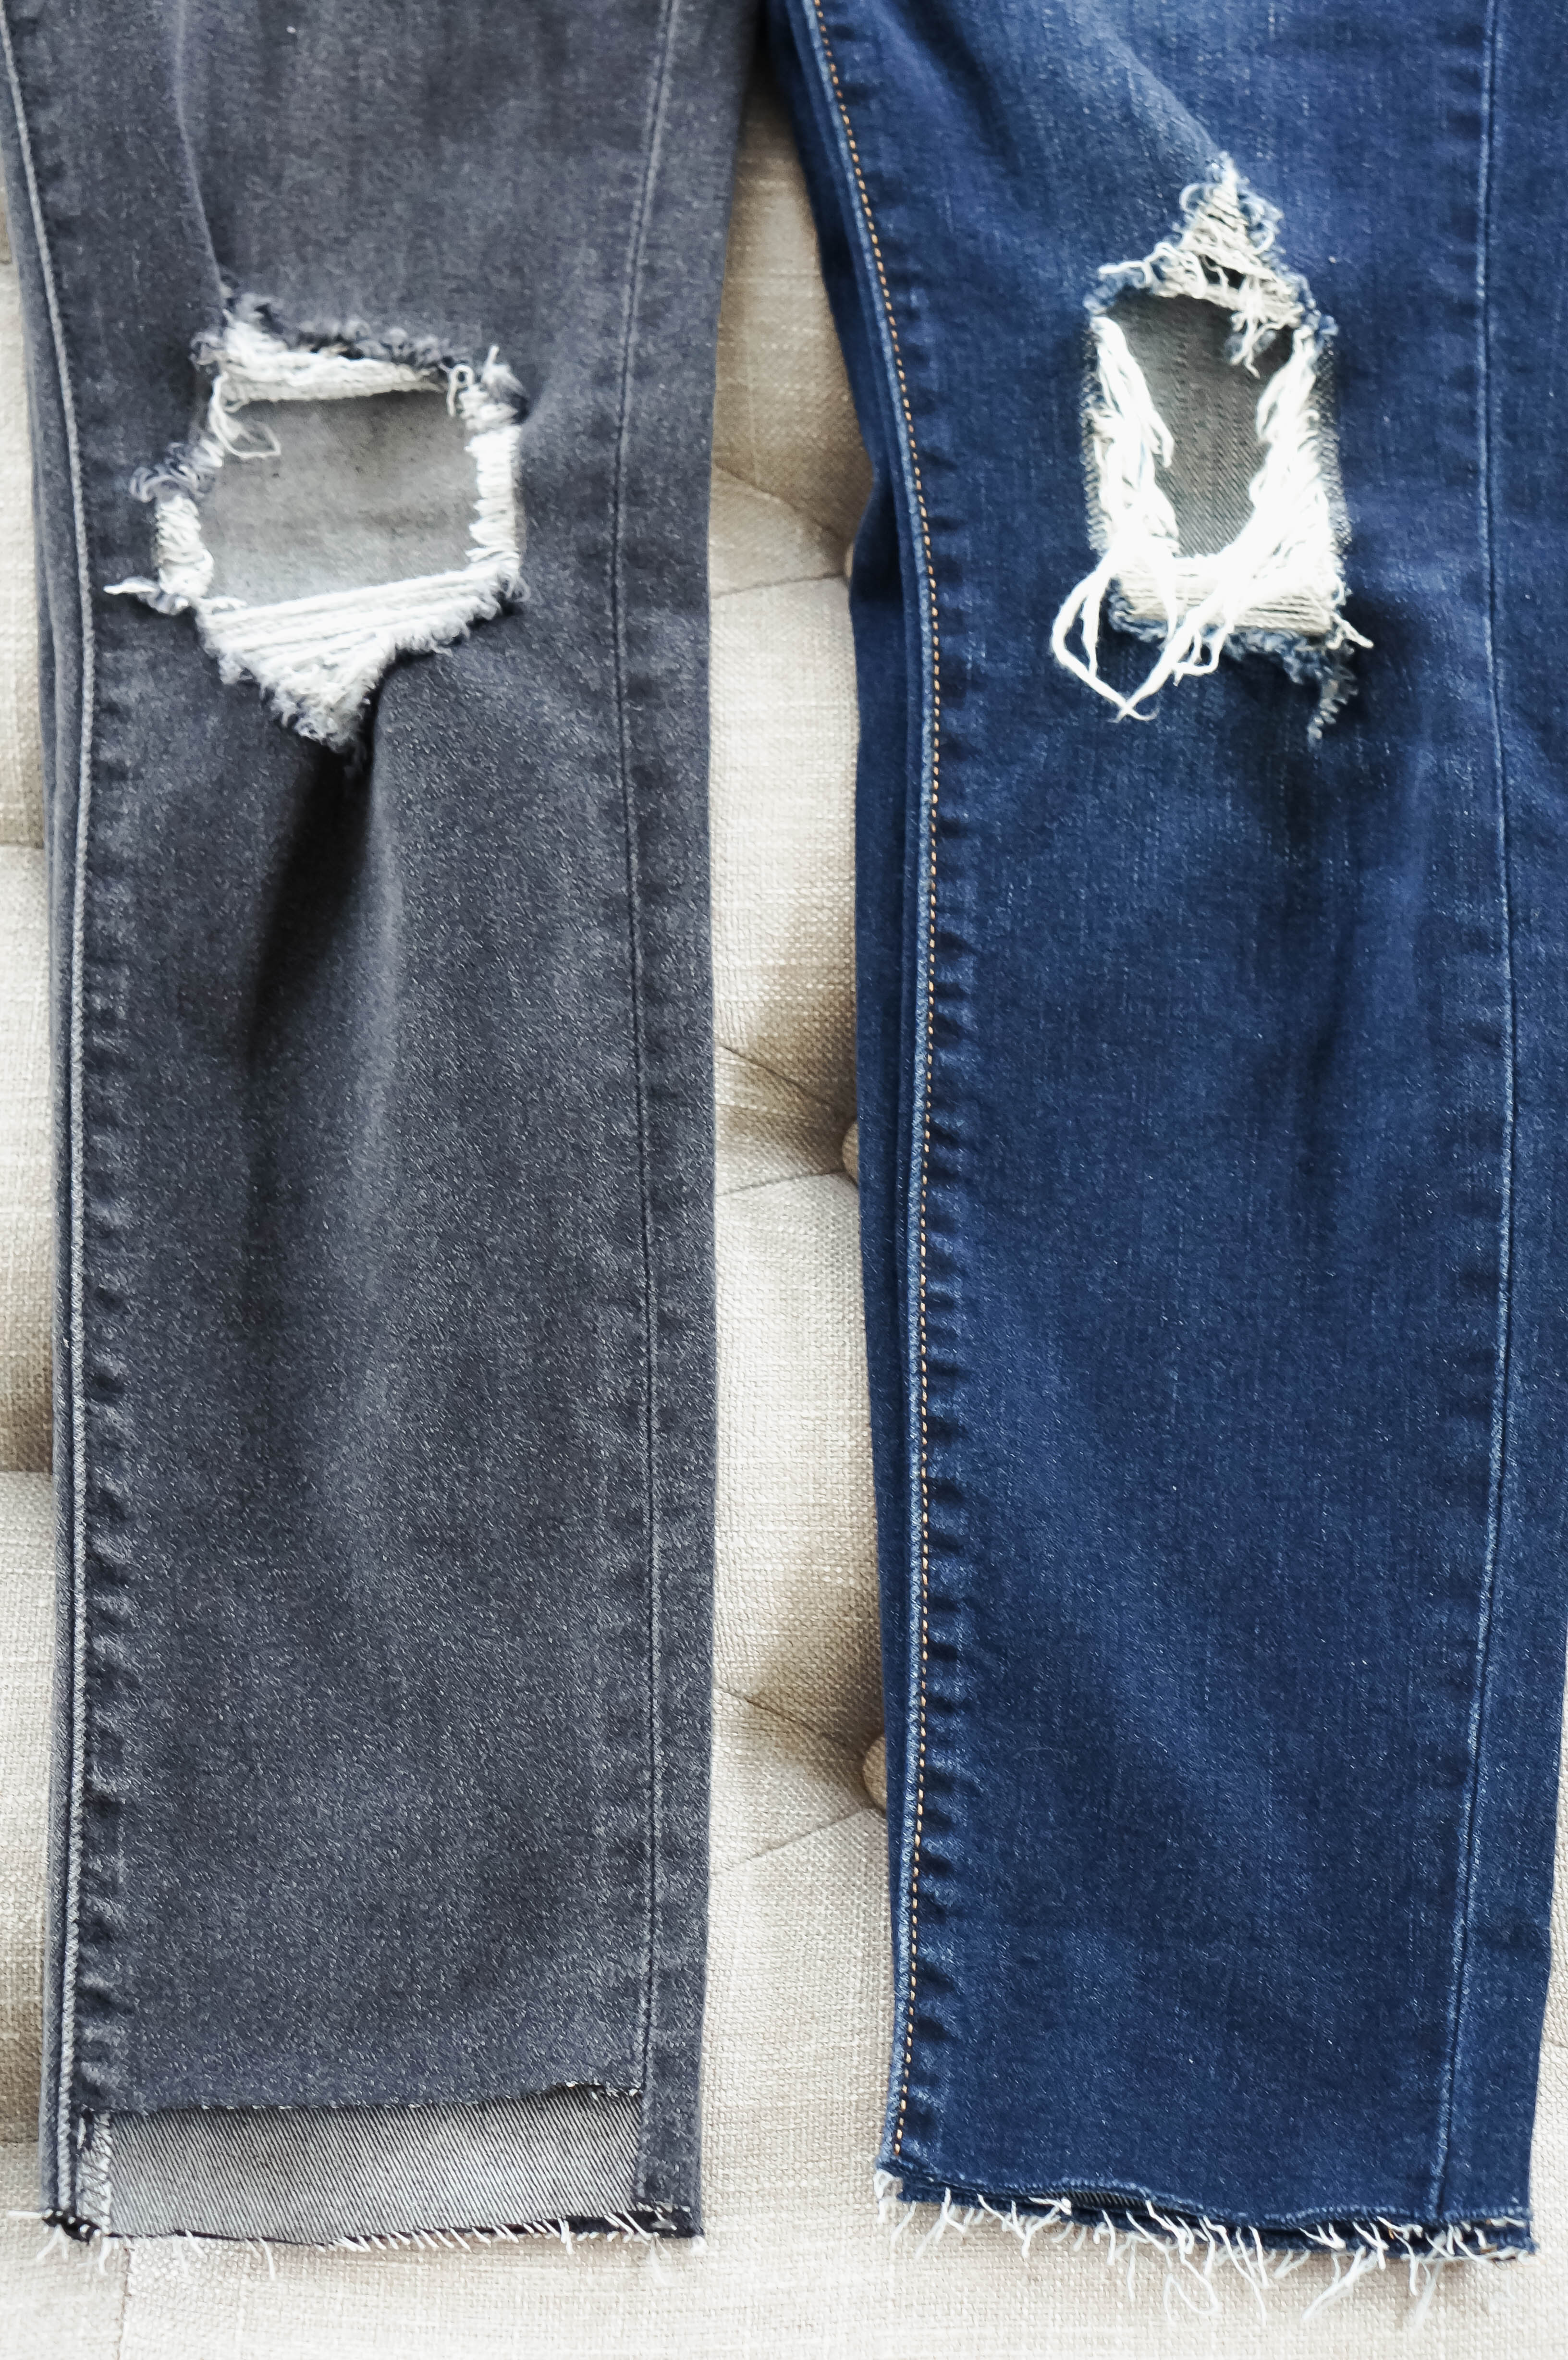 DIY: How To Cut The Hem Off Jeans - Red White & Denim